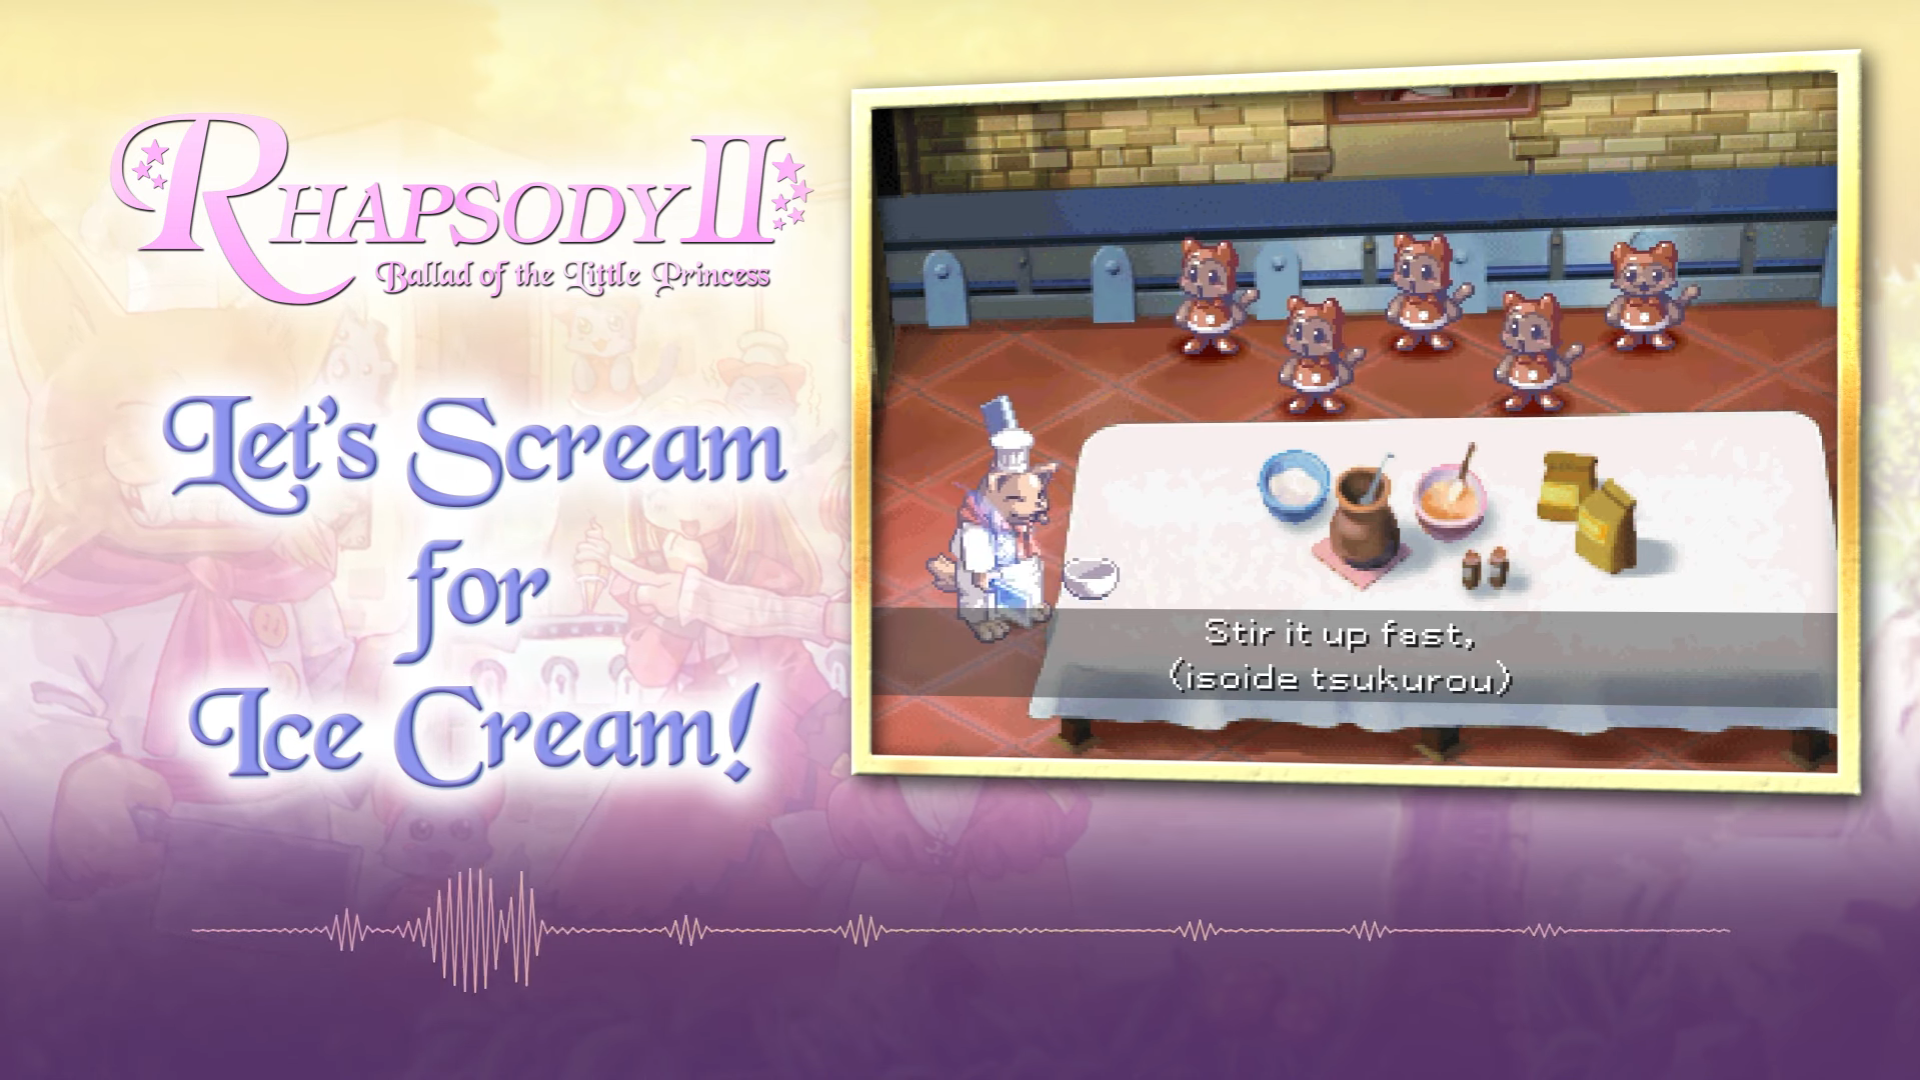 New Rhapsody: Marl Kingdom Chronicles Trailer Spotlights Vocal Songs; Let’s Scream for Ice-Cream Together